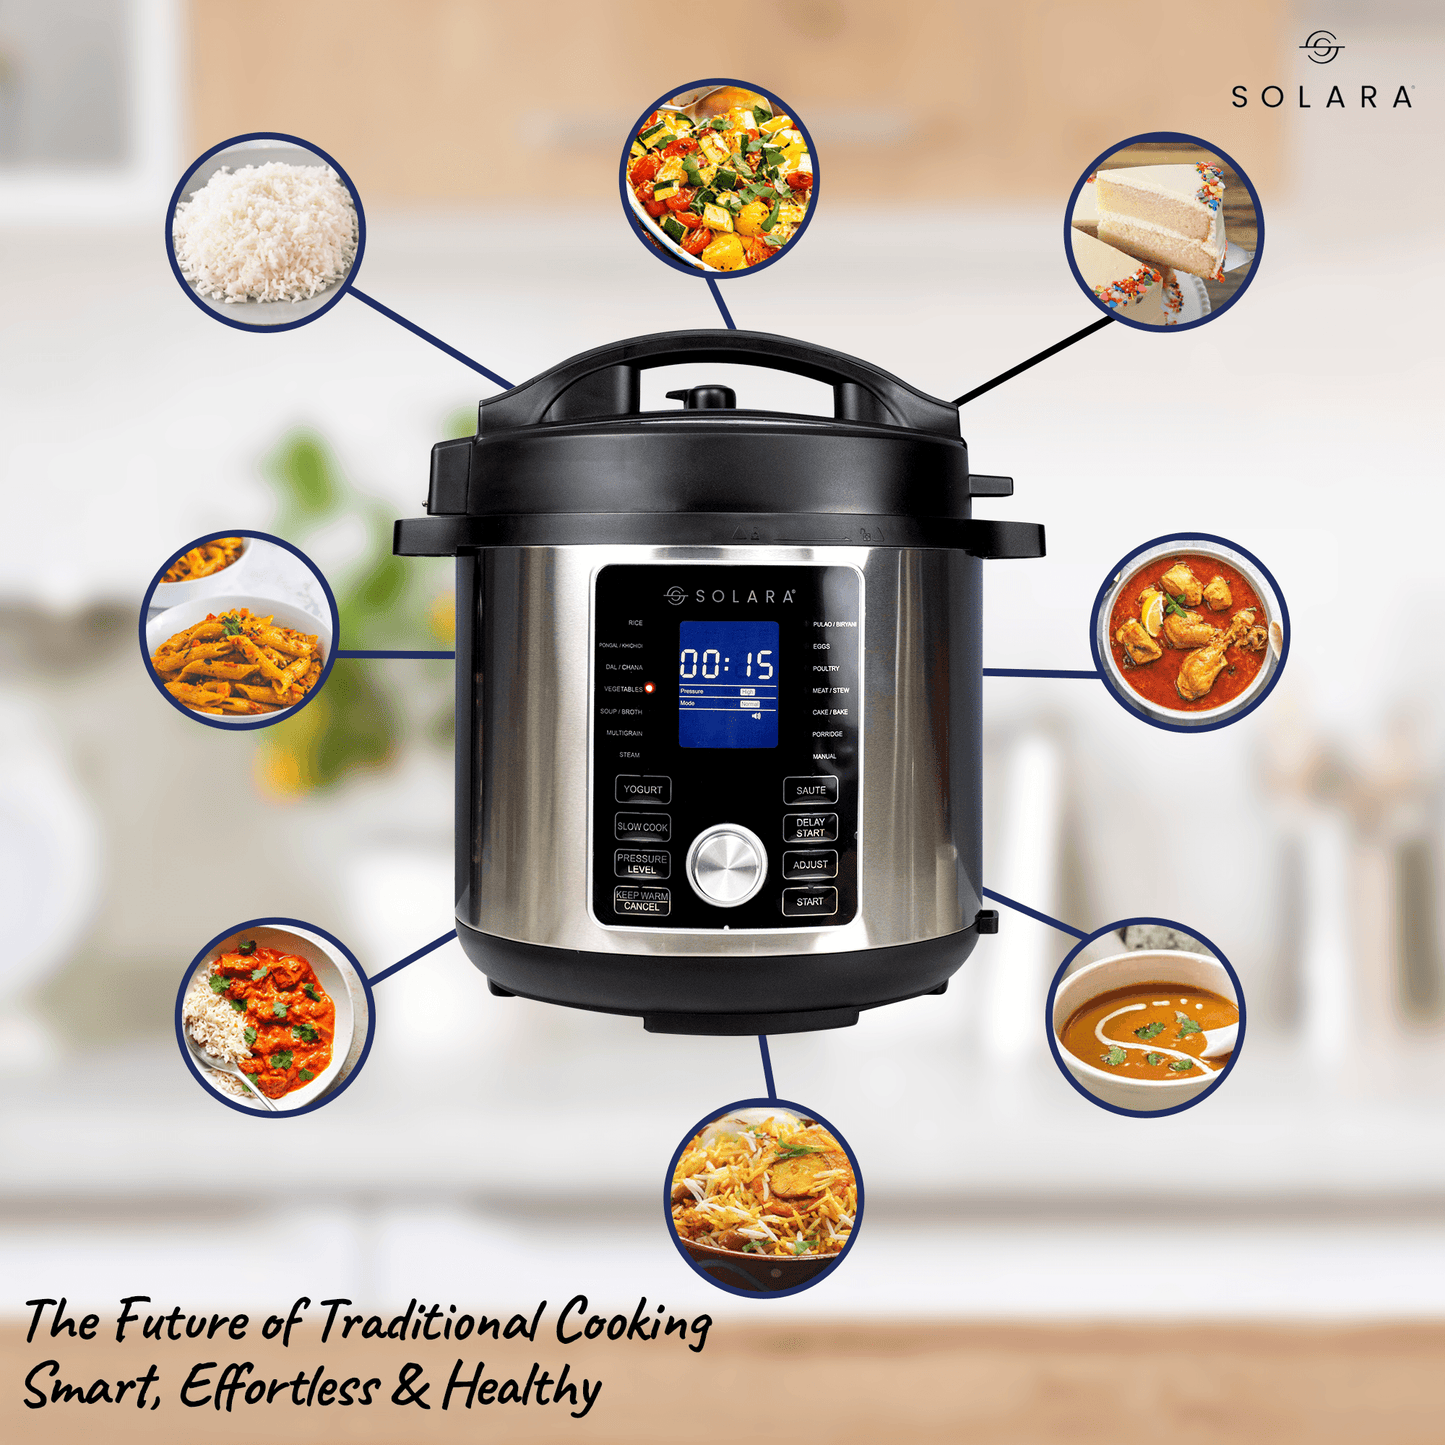 SOLARA Magic Pot Electric Pressure Cooker | 7-in-1 Functions | One Touch Cooking | 17 Preset Options